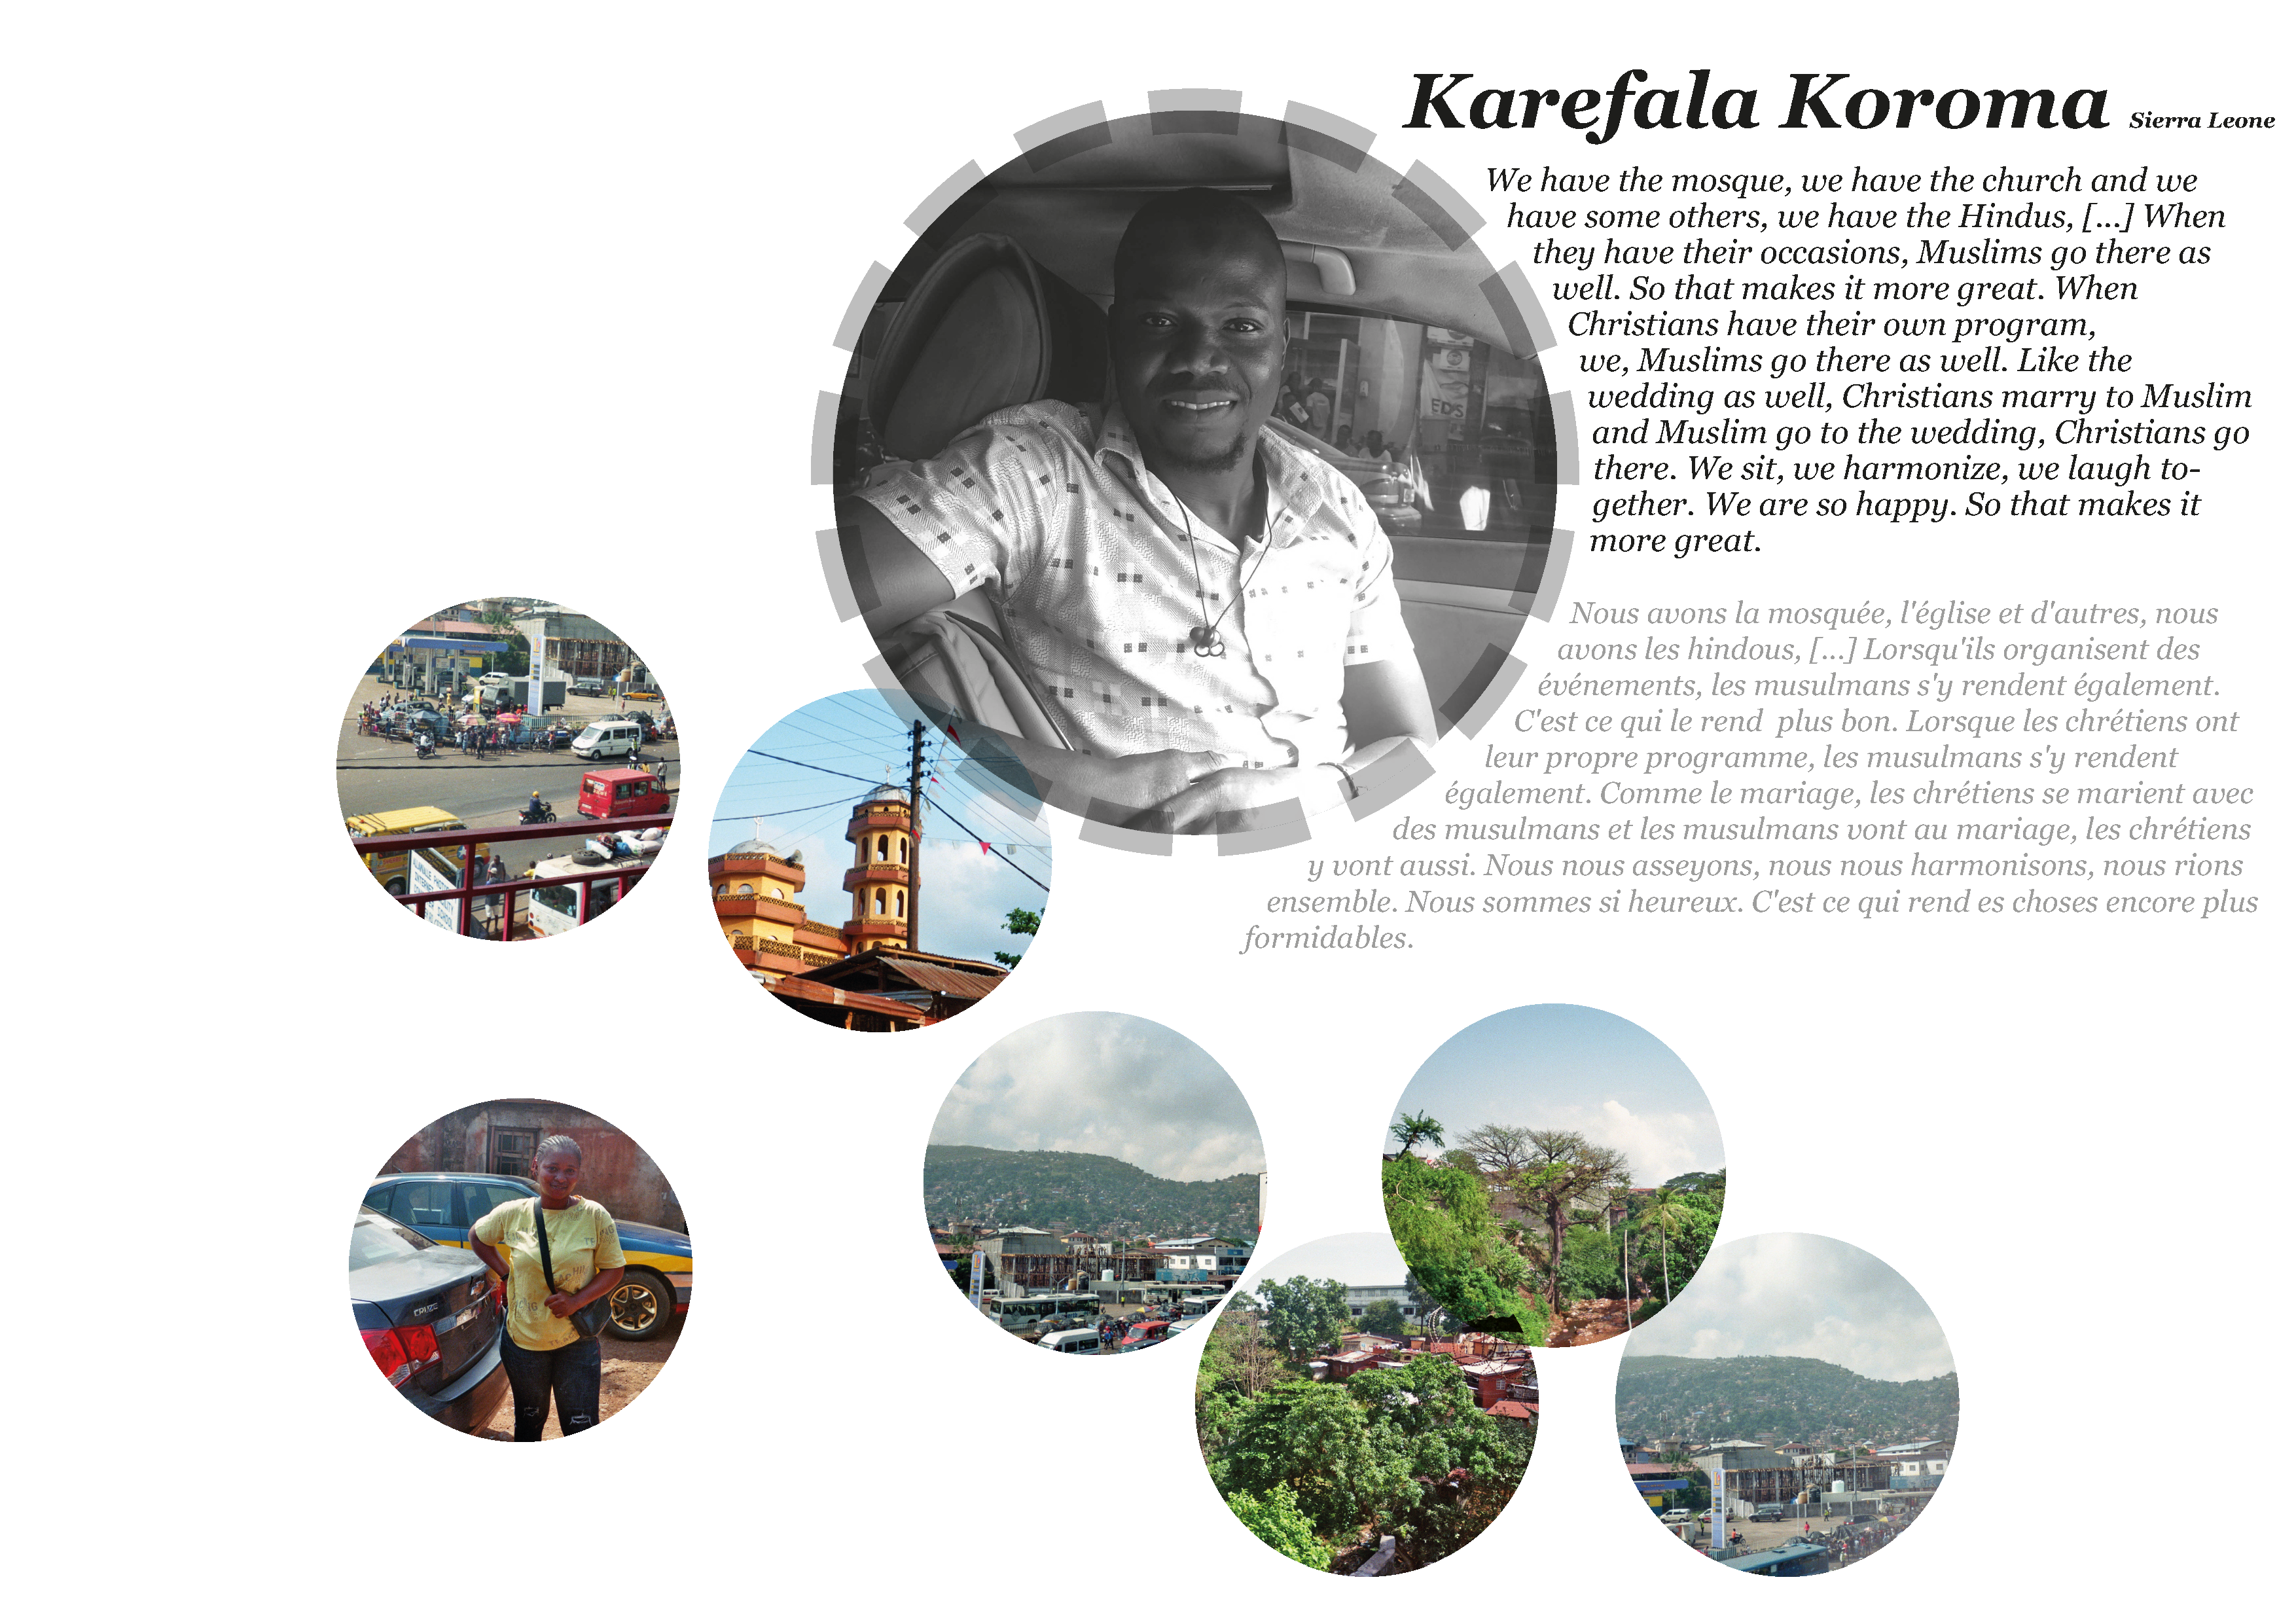 Collage of pictures of religion and peace by Karefala Koroma in Sierra Leone